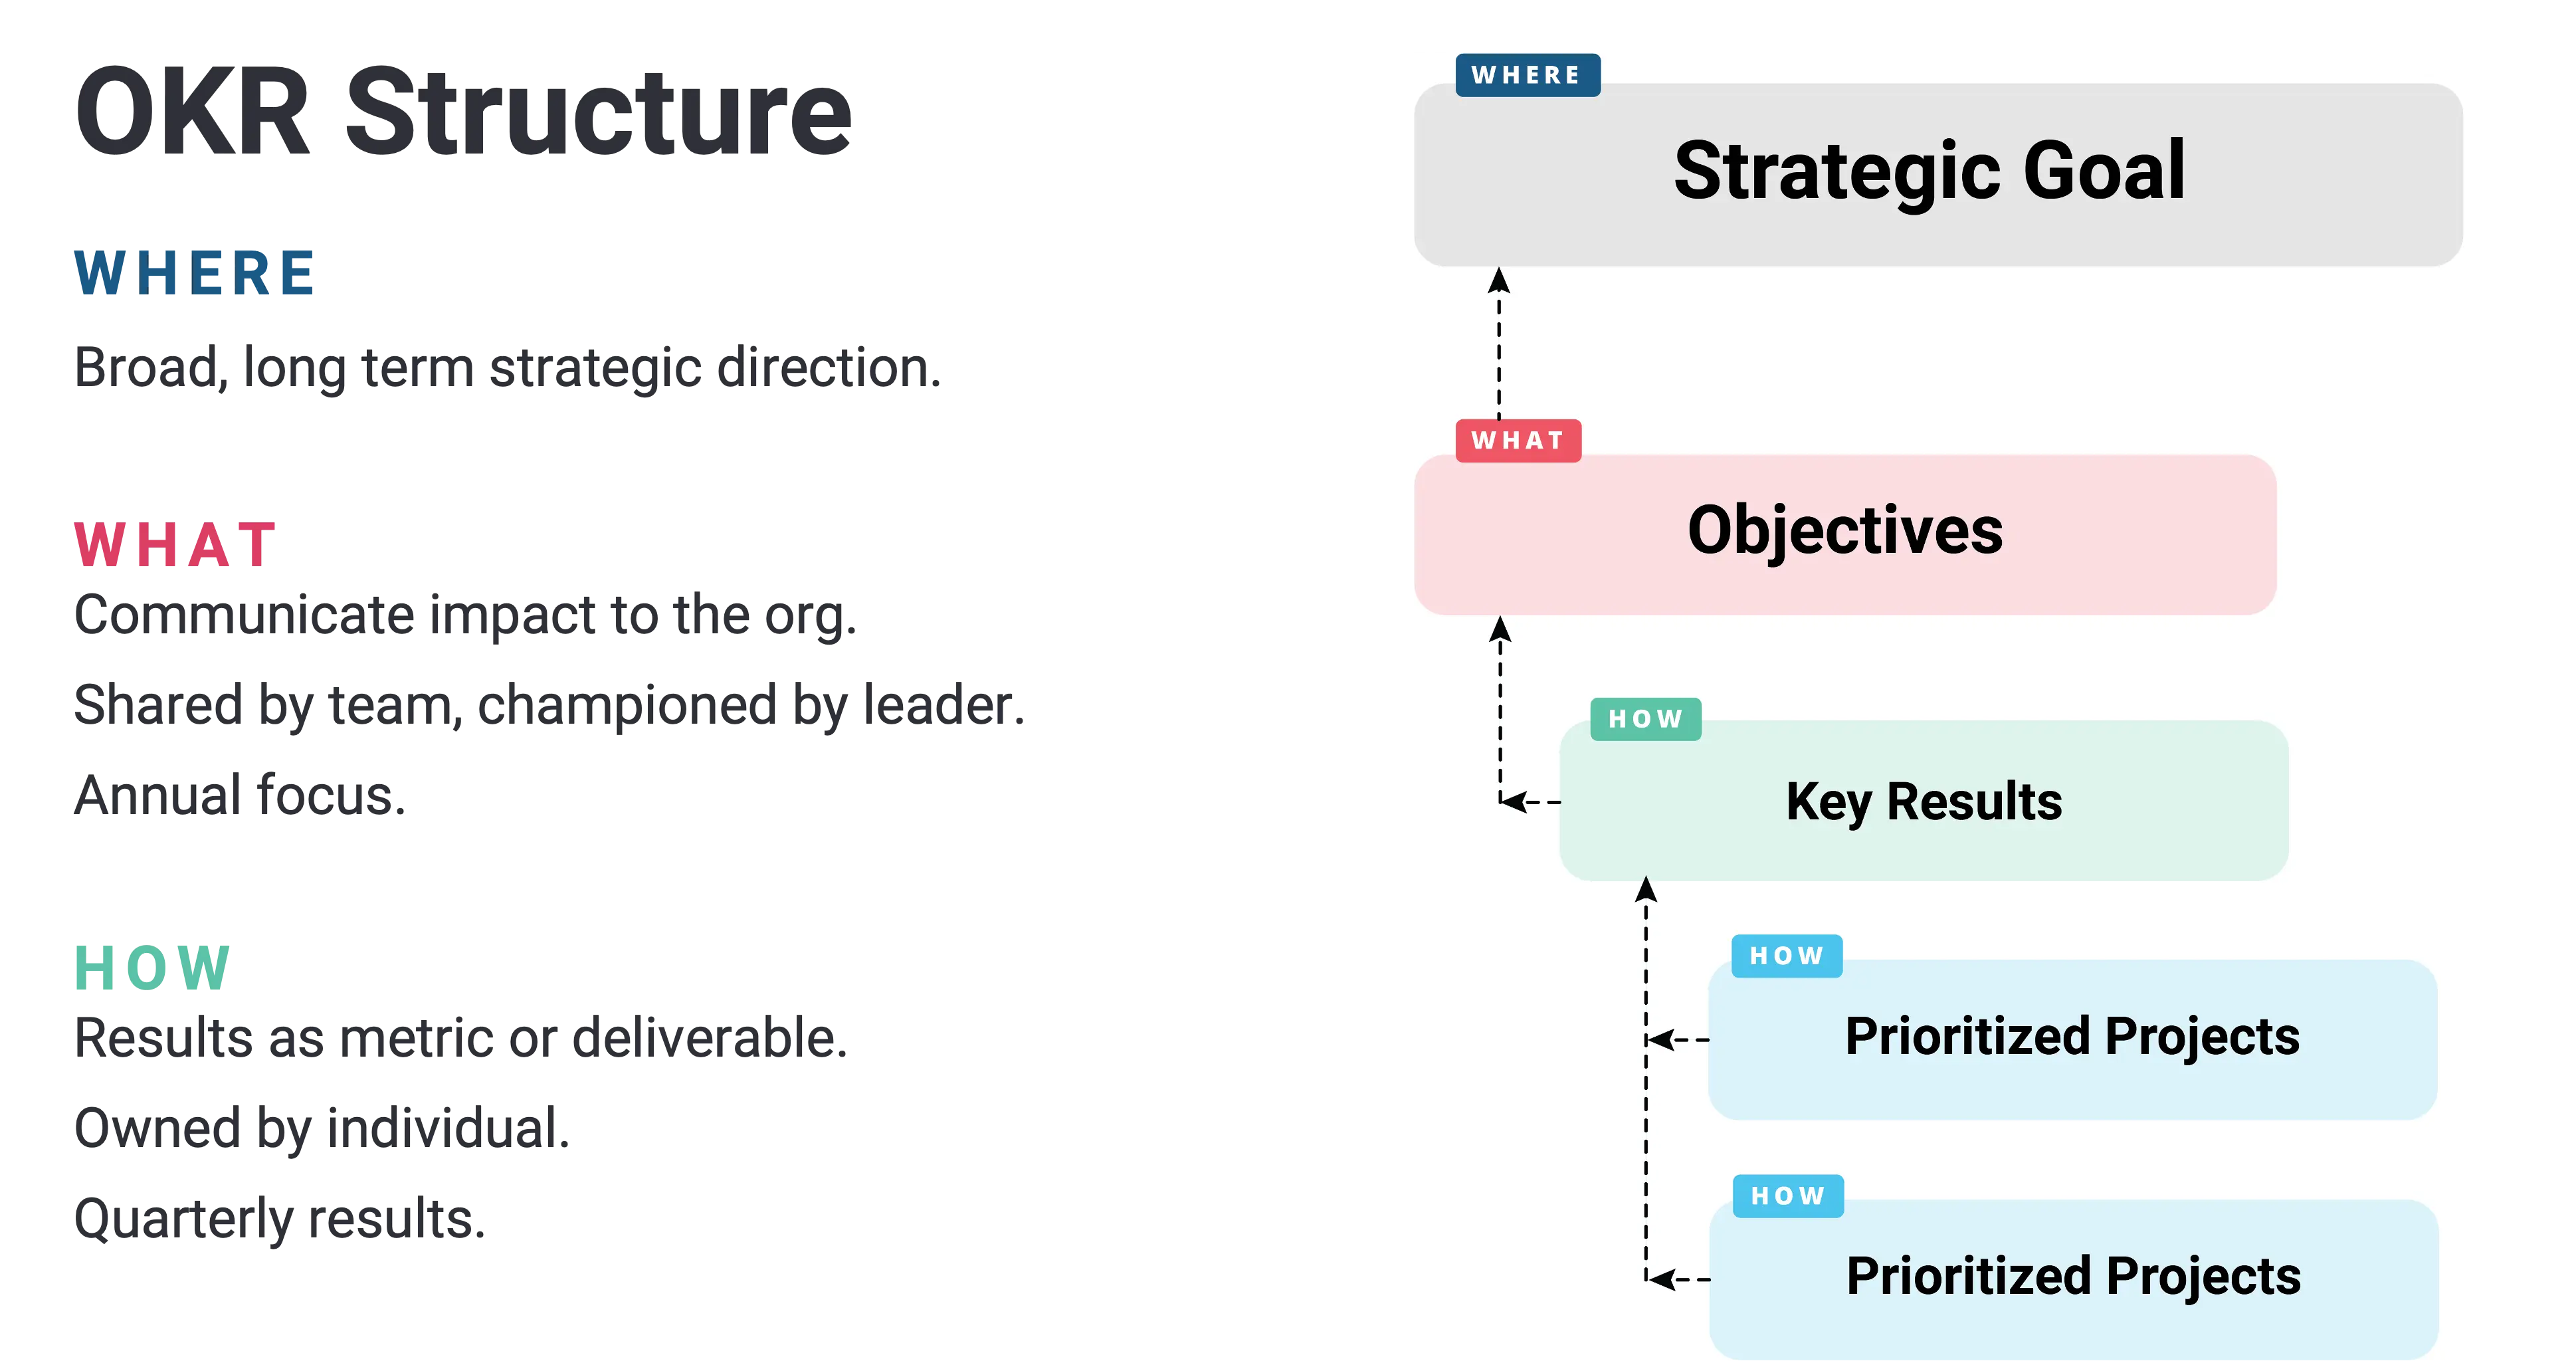 OKR Structure